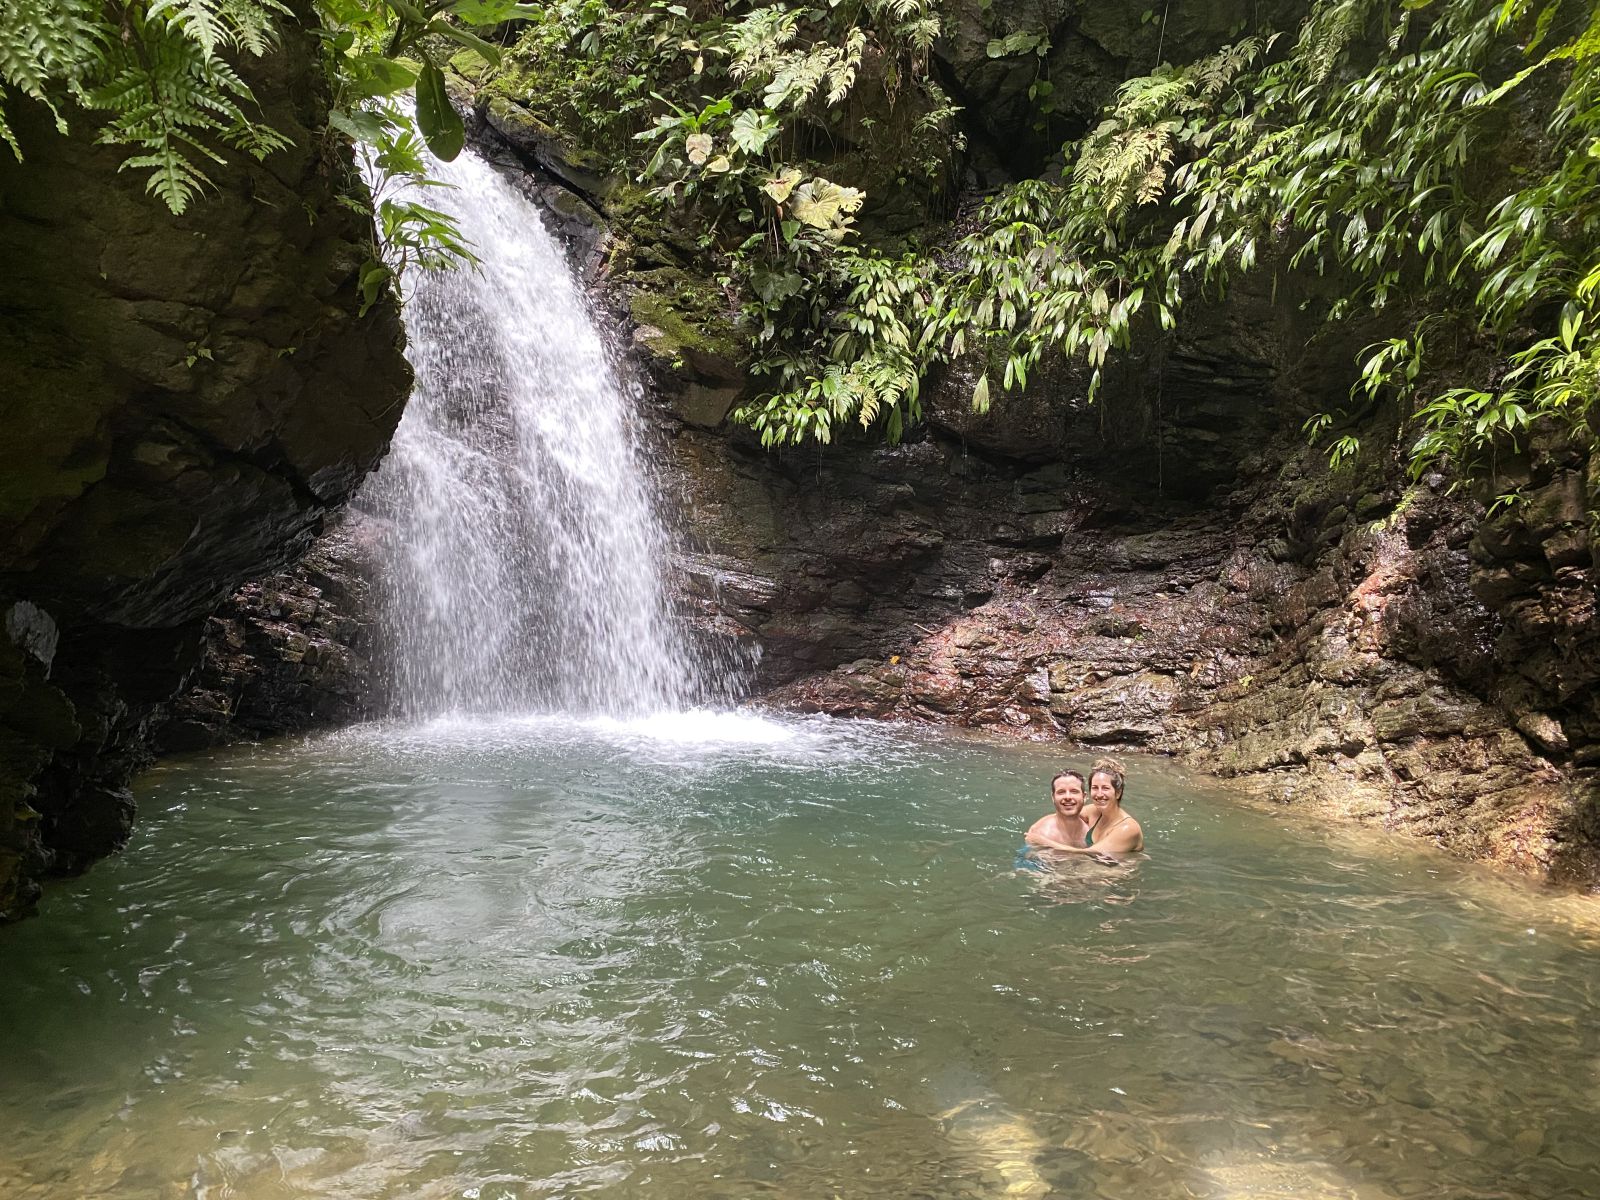 Couple in a Waterfall pool, Hacienda Ébano, a Nature Reserve and Farm with Rainforest and Waterfalls at Barú, Costa Rica